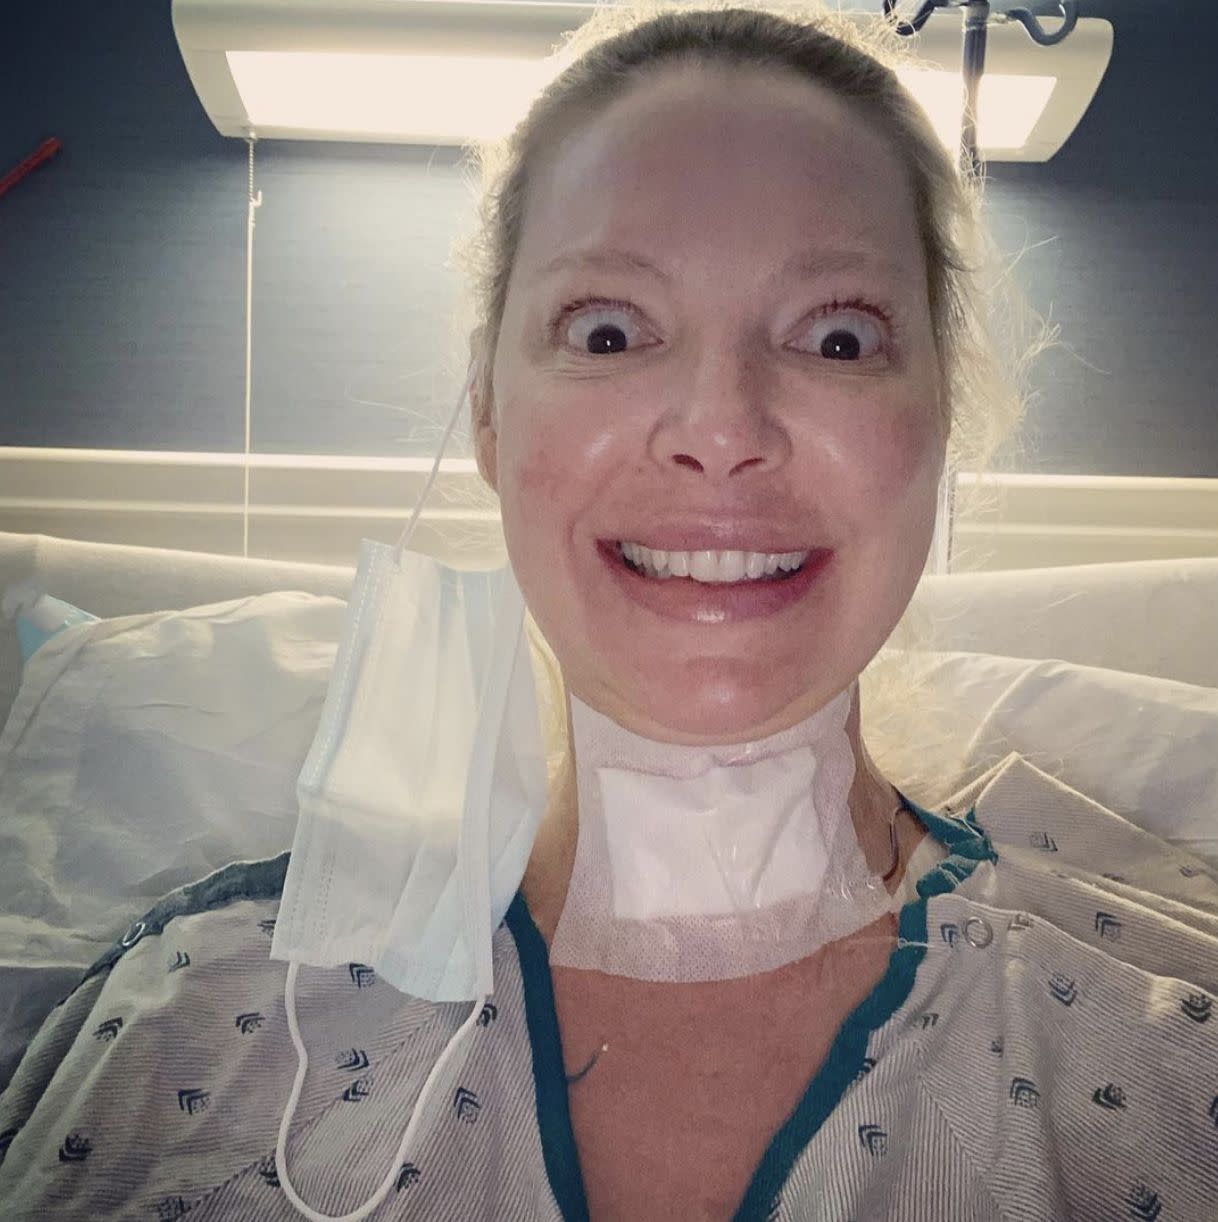 Katherine Heigl snaps a smiling selfie after surgery from her hospital bed. "Well...I am now bionic!! Two titanium disk now inhabit my neck and I can probably stand on my head for like hours...I’m not gonna try it just yet but give me a few months and I’ll blow your mind!! I am so deeply deeply grateful to the incredible Dr’s and care team that saved me from the most excruciating pain I have ever experienced and blessed me with a new pain free lease on life!"